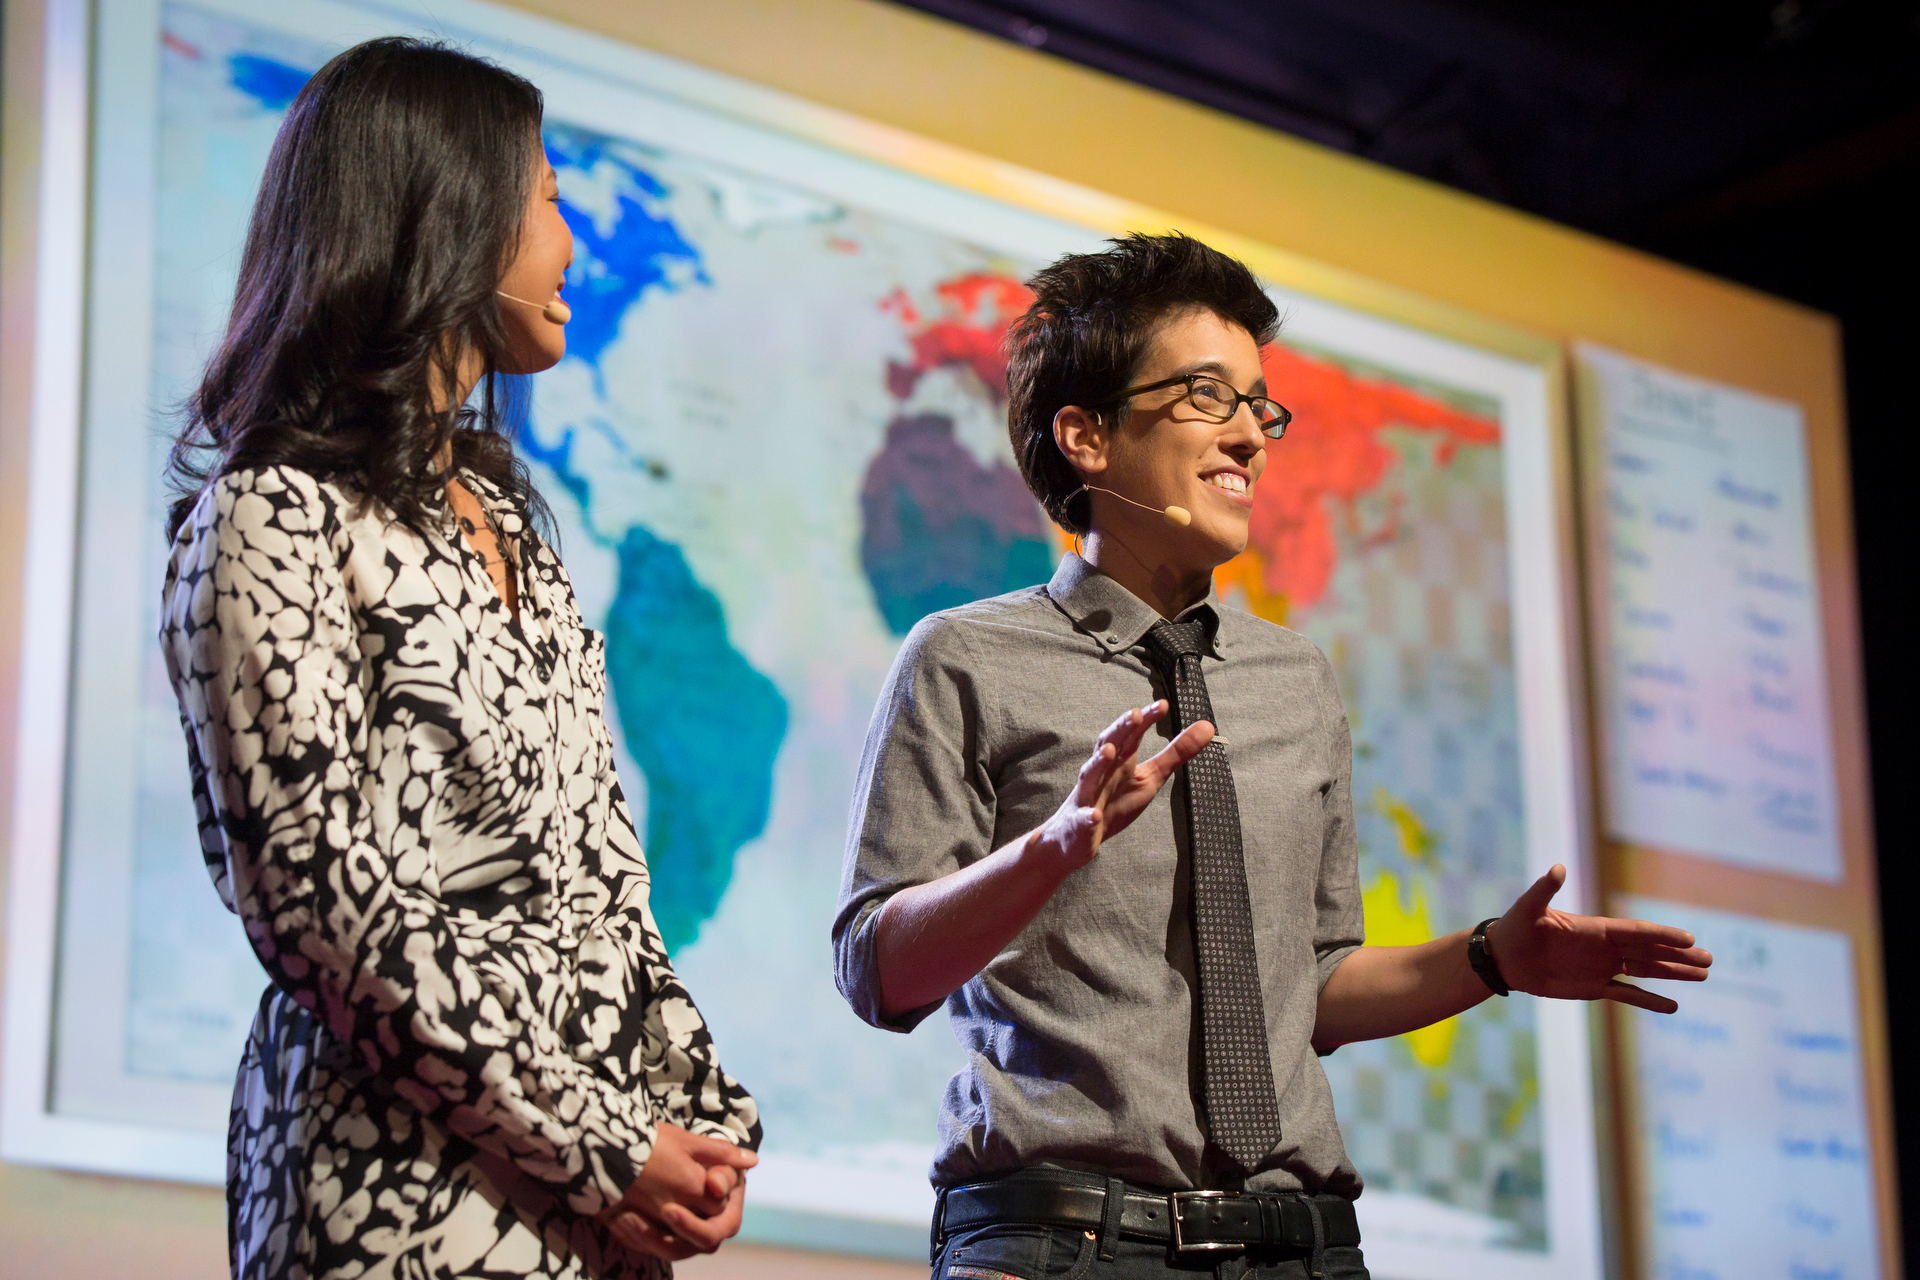 Jenni Chang and Lisa Dazols speak at TEDWomen2015 - Momentum, Session 6, May 29, 2015, Monterey Conference Center, Monterey, California, USA. Photo: Marla Aufmuth/TED